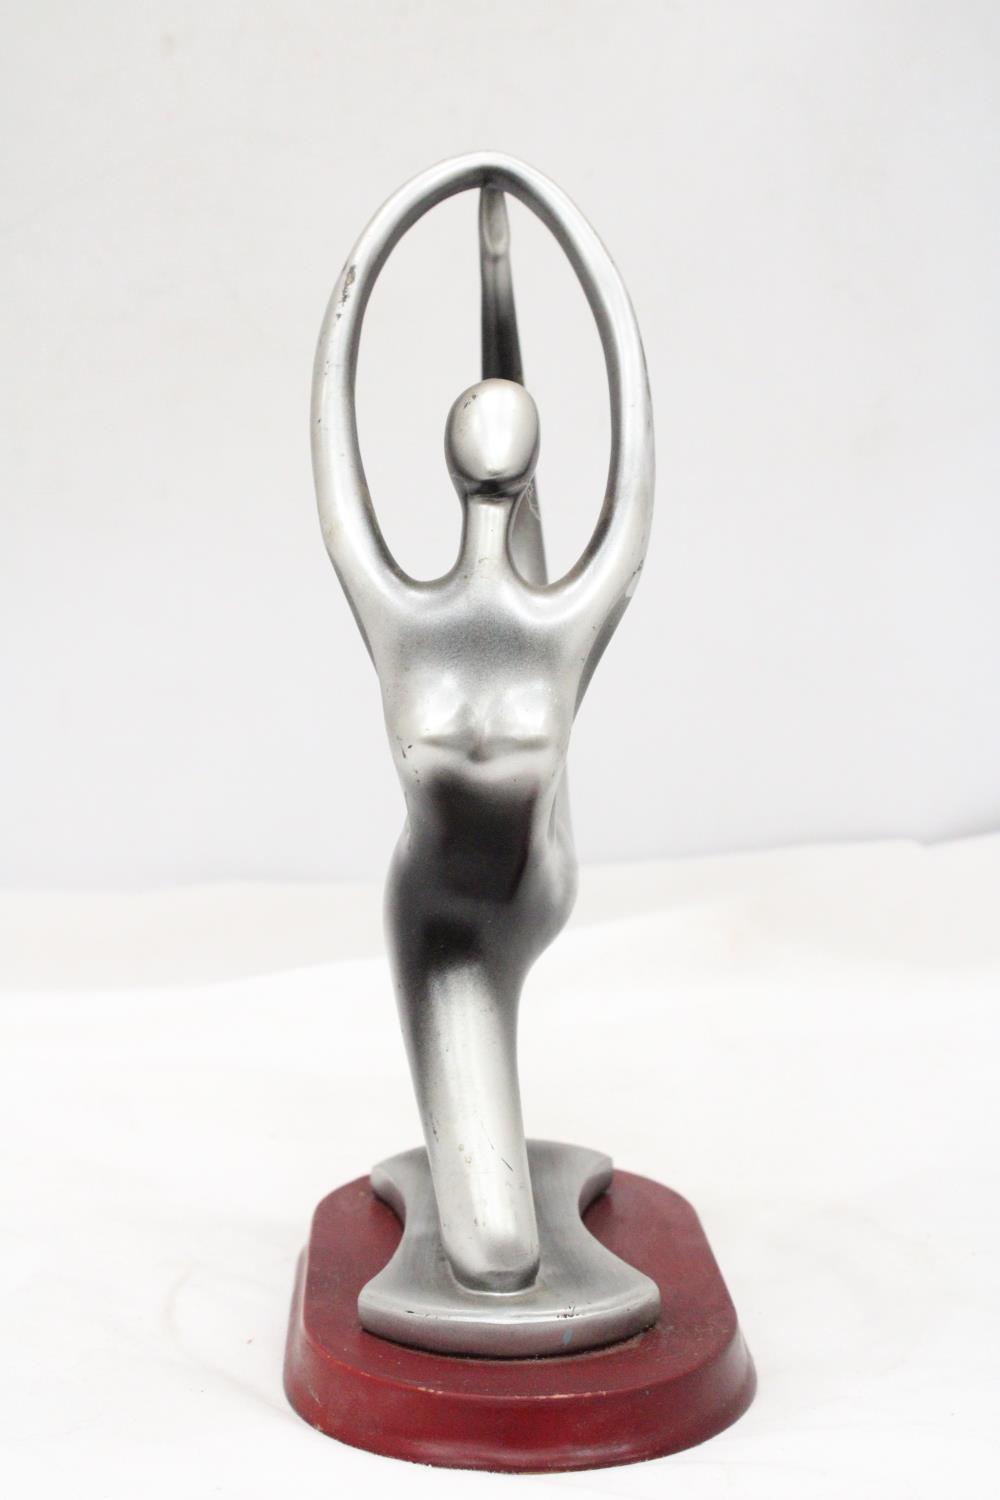 AN ART DECO, NUDE LADY, ALUMINIUM GYMNAST ON A WOODEN BASE, HEIGHT 30CM - Image 3 of 5